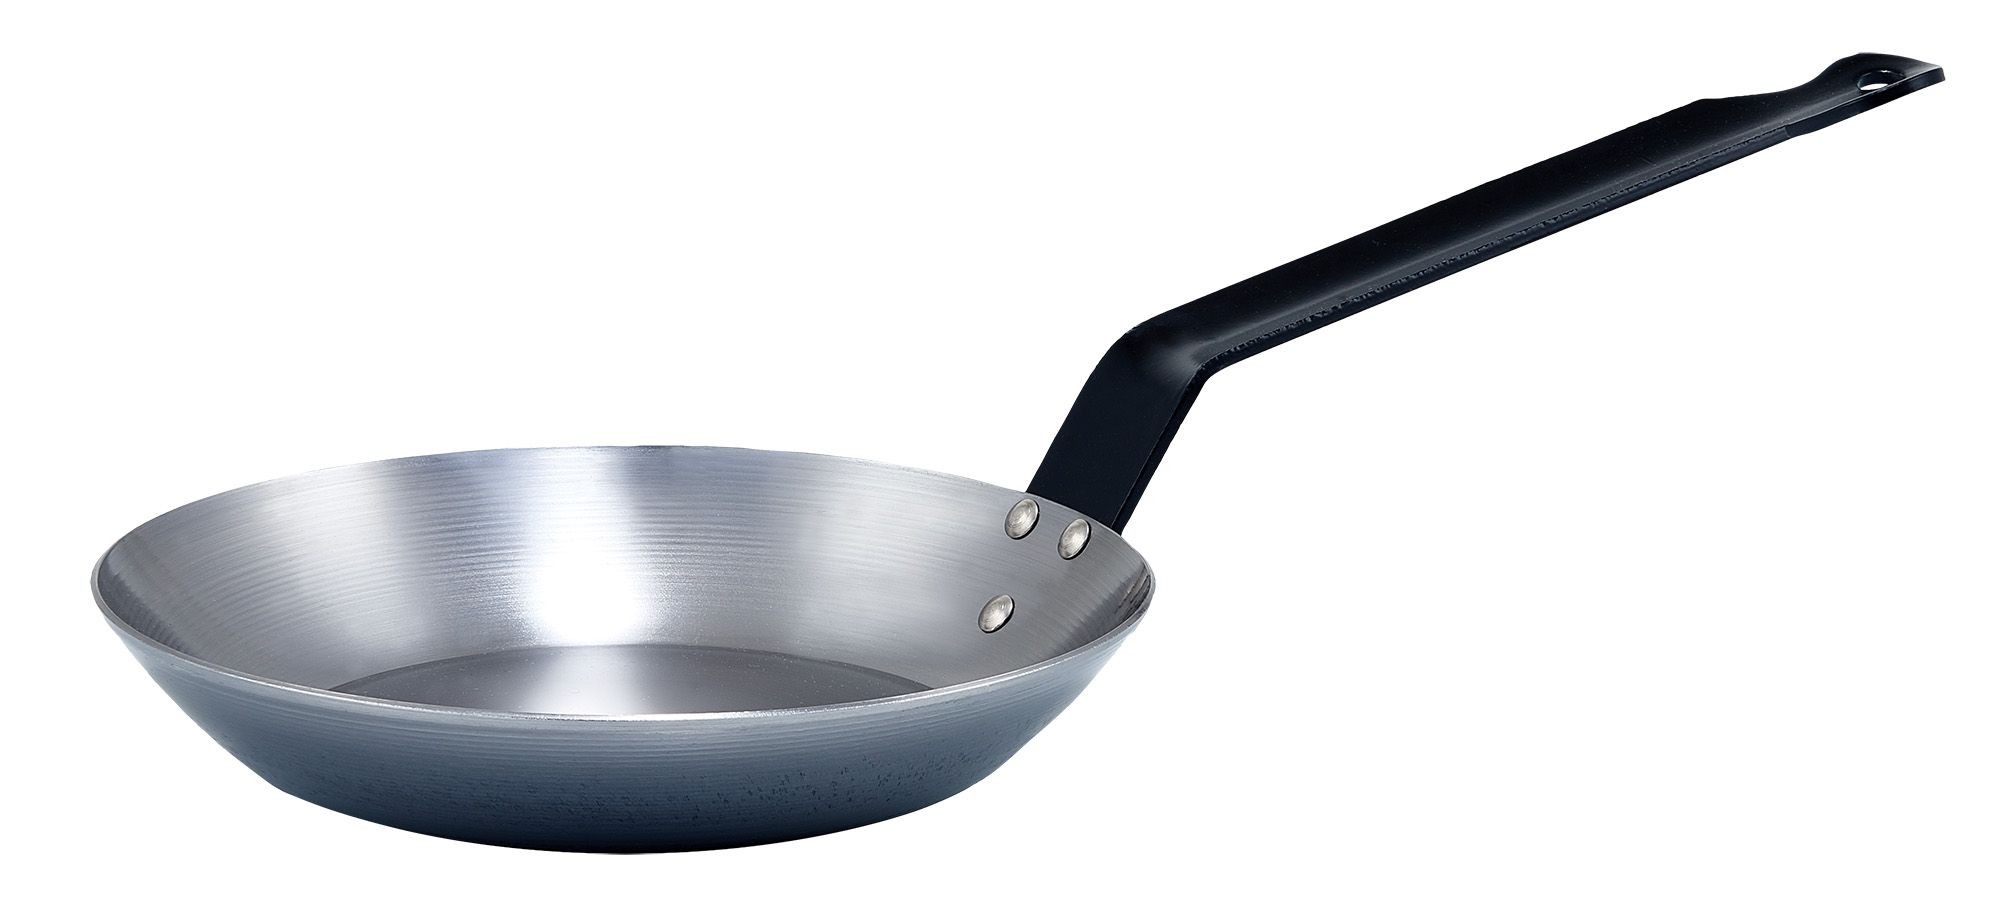 Winco CSFP-11 French Style Carbon Steel Fry Pan 10-3/8"